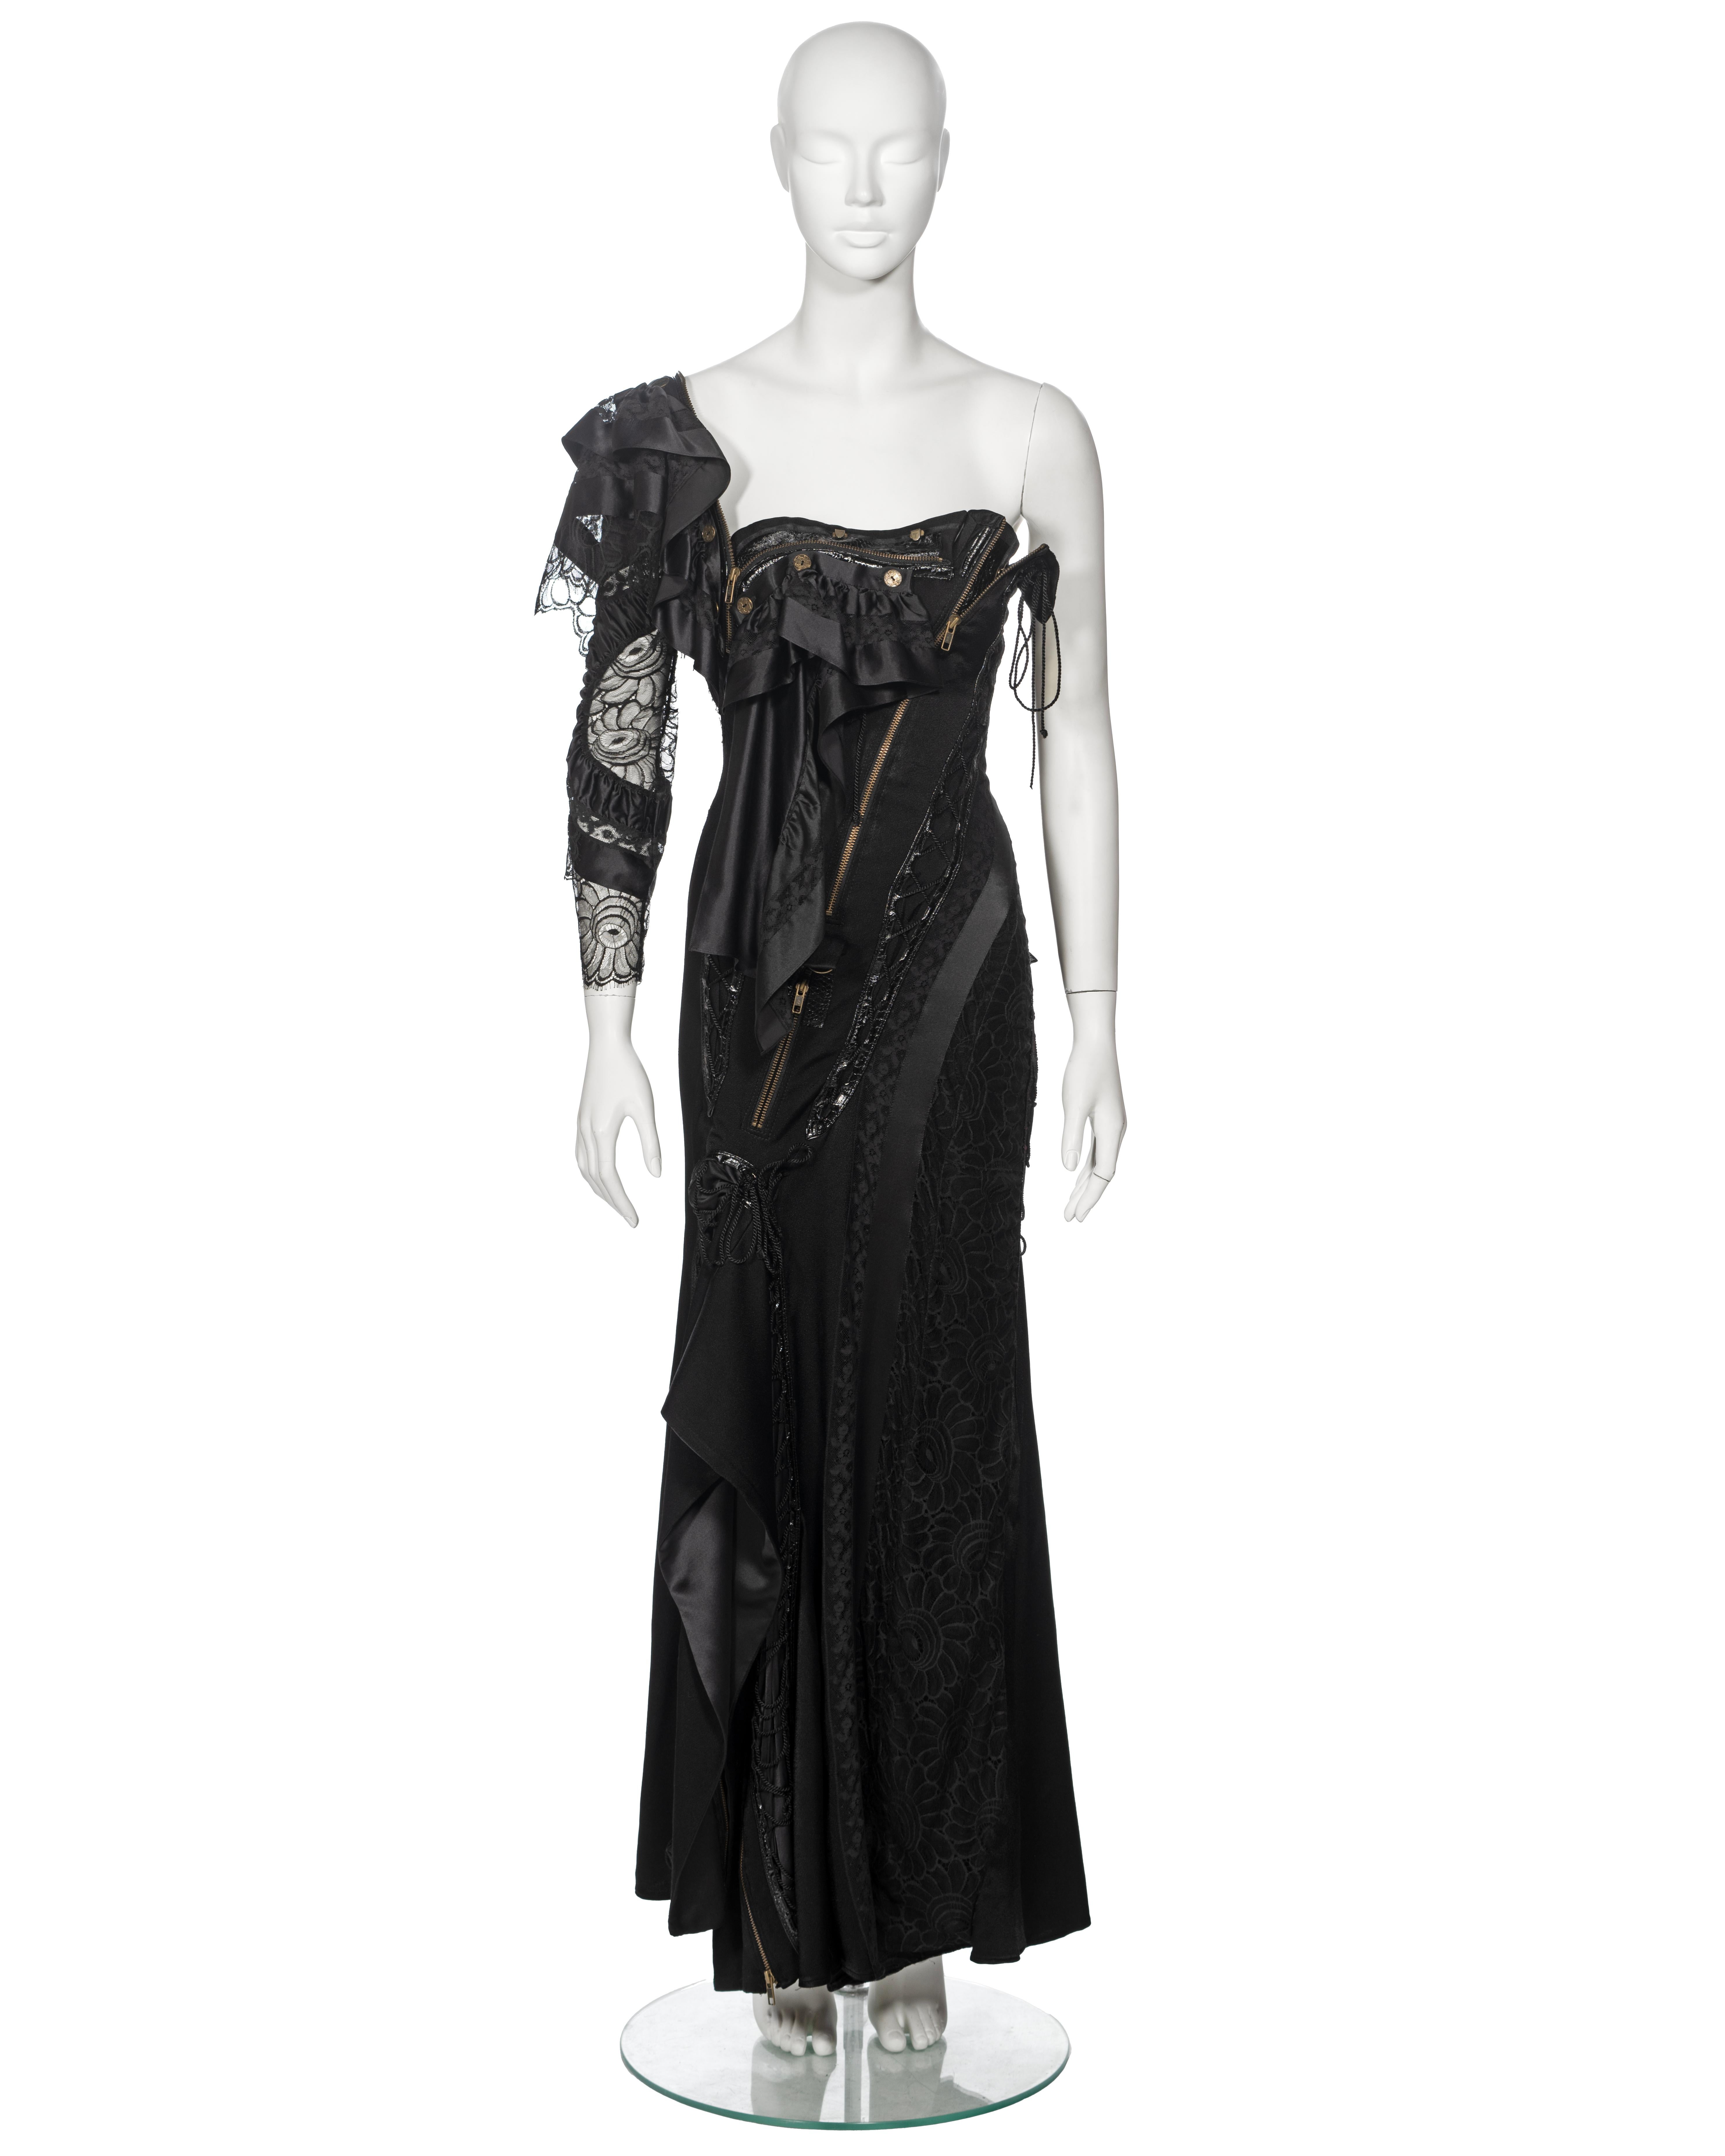 ▪ Archival Runway John Galliano Evening Dress
▪ Creative Director: John Galliano 
▪ Spring-Summer 2002
▪ Sold by One of a Kind Archive 
▪ Museum Grade
▪ Crafted from an array of fabrics including lace, silk, crepe, and croc-embossed leather, lending